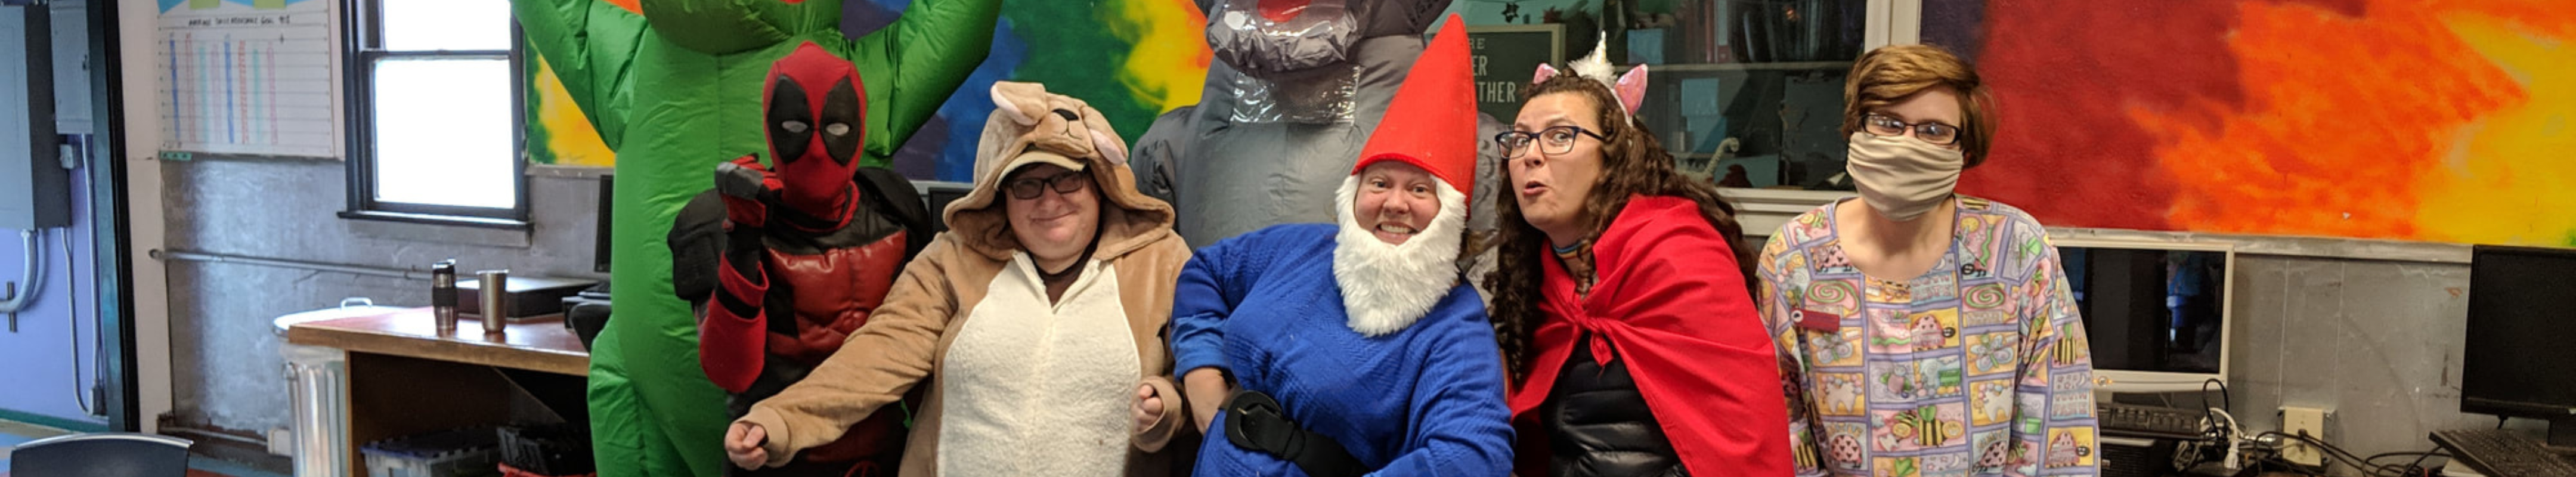 Teachers and Staff dressed up in costumes smiling and posing for a picture